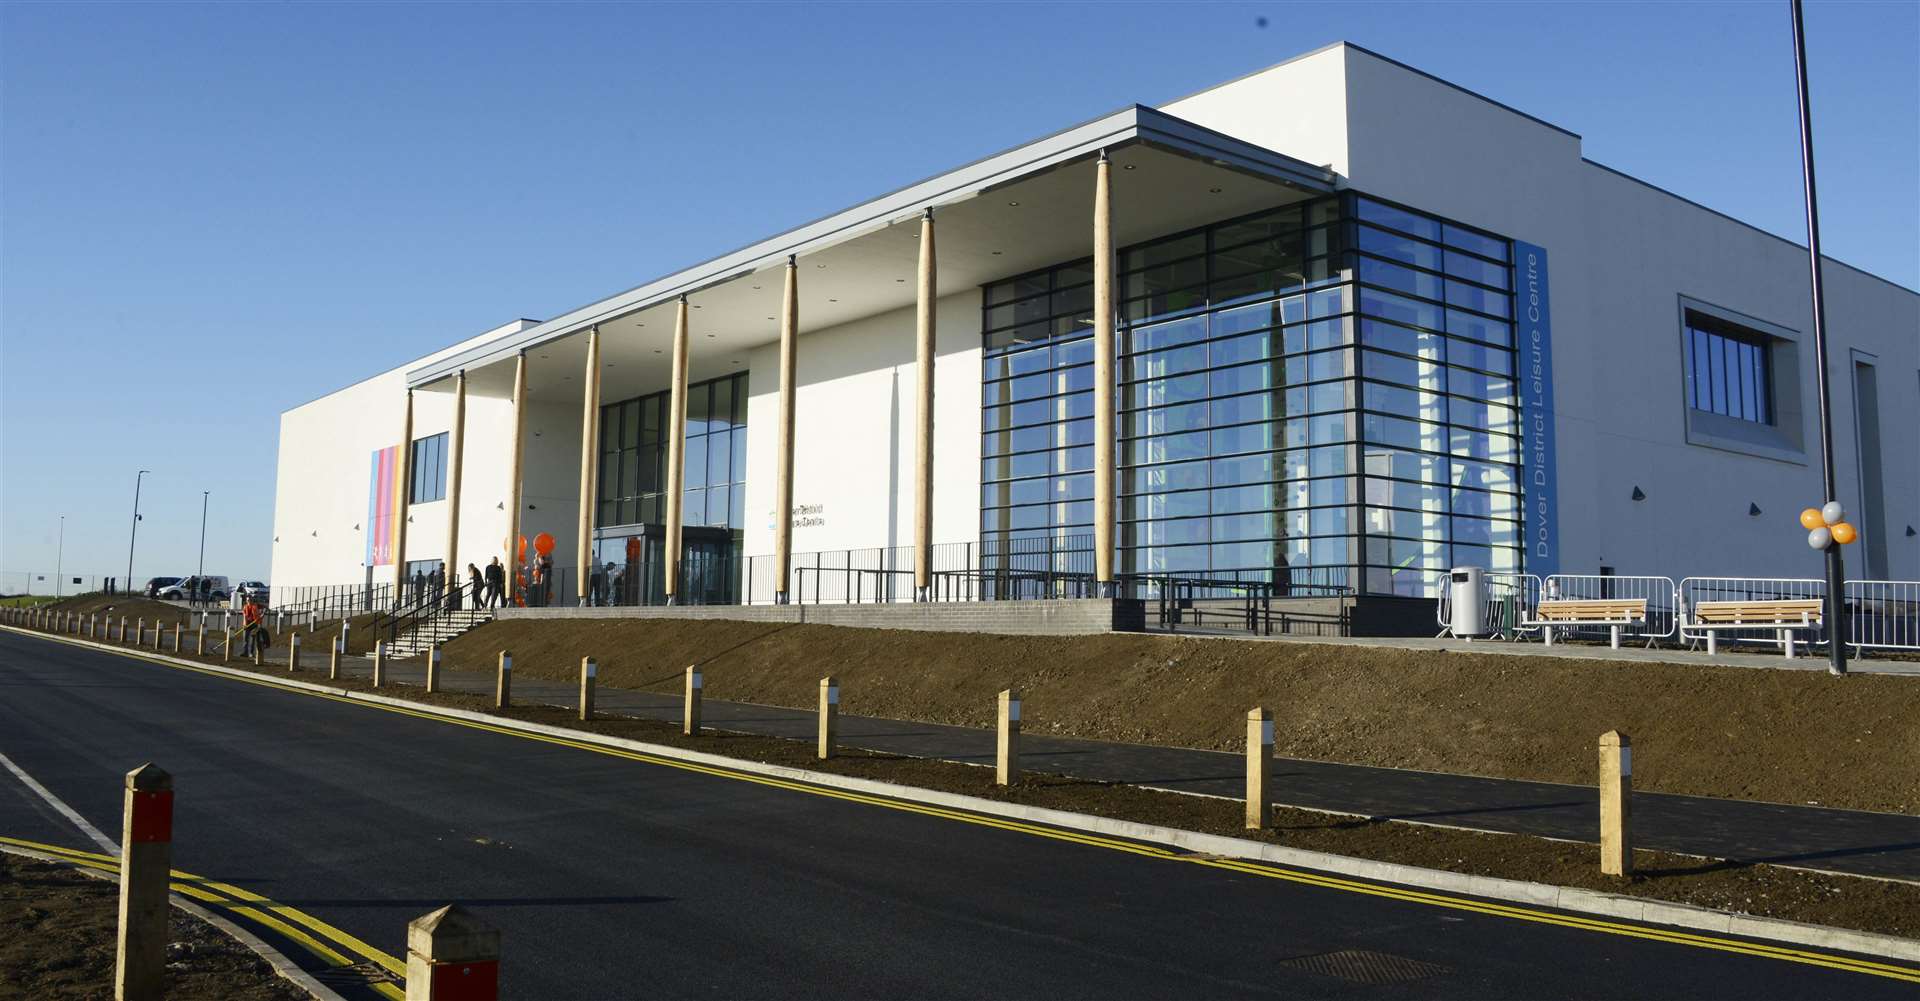 The new £26 million facility boasts an array of features including the first swimming pool in Kent to be purpose-built to Sport England specifications for a county standard competition swimming.